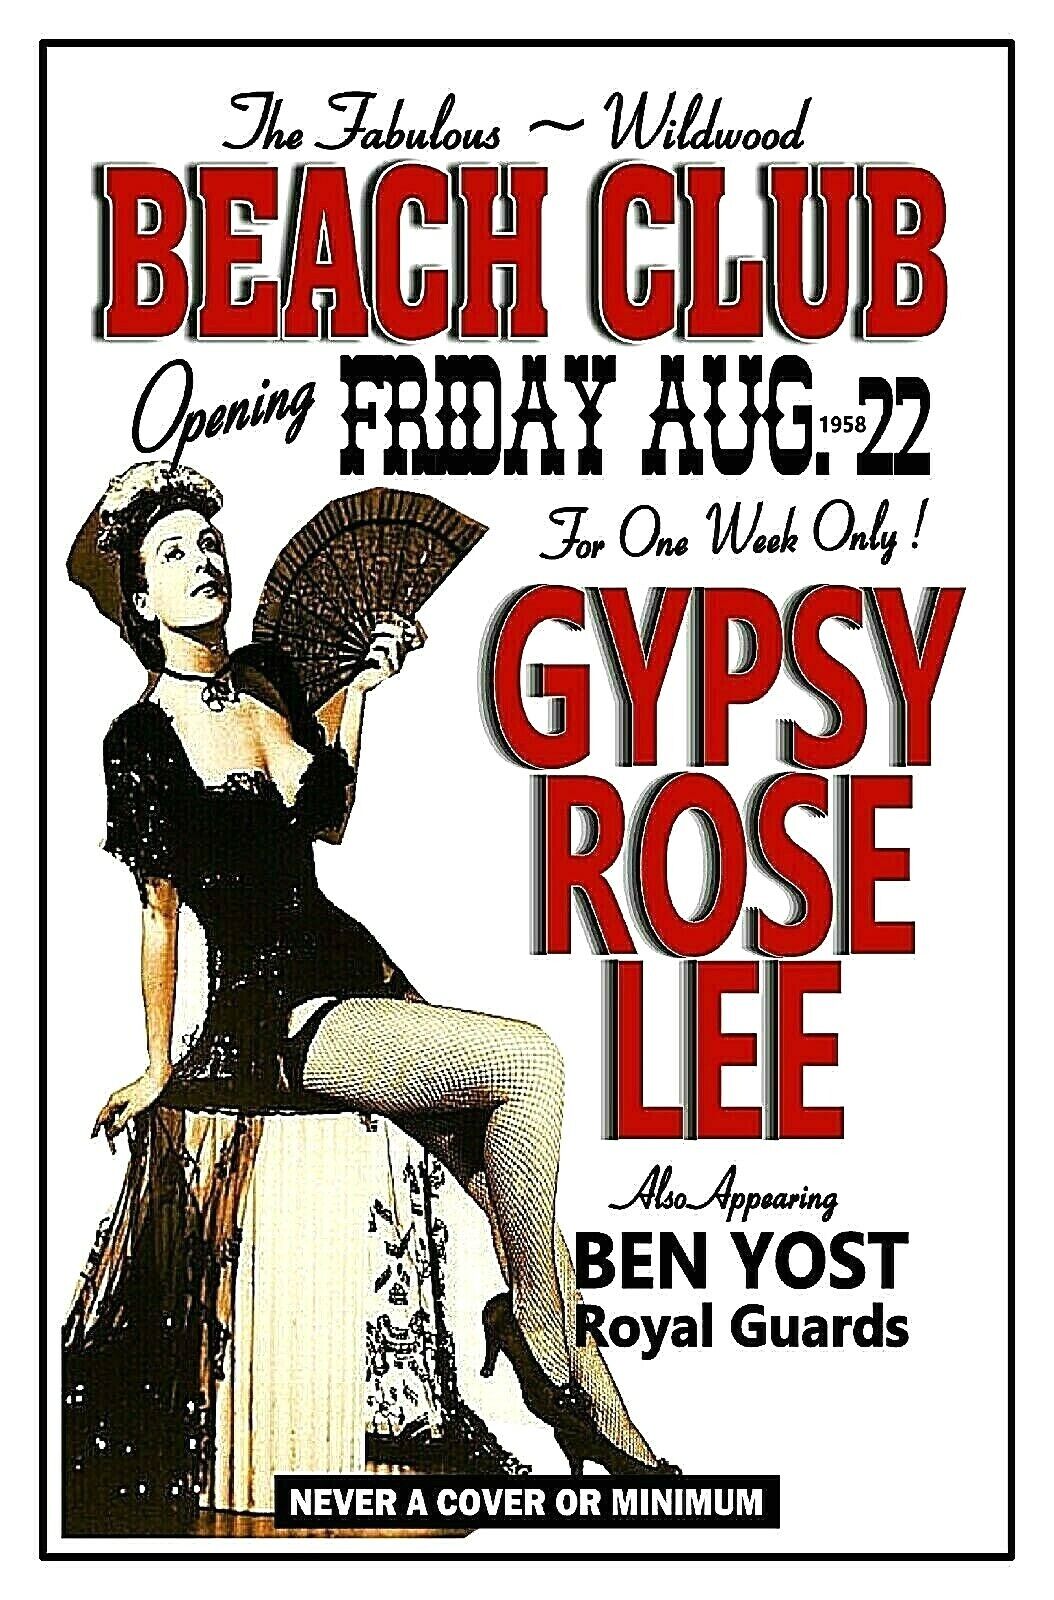 GYPSY ROSE LEE 1958 BEACH CLUB Wildwood NJ POSTER Pole Poster Gog Sign